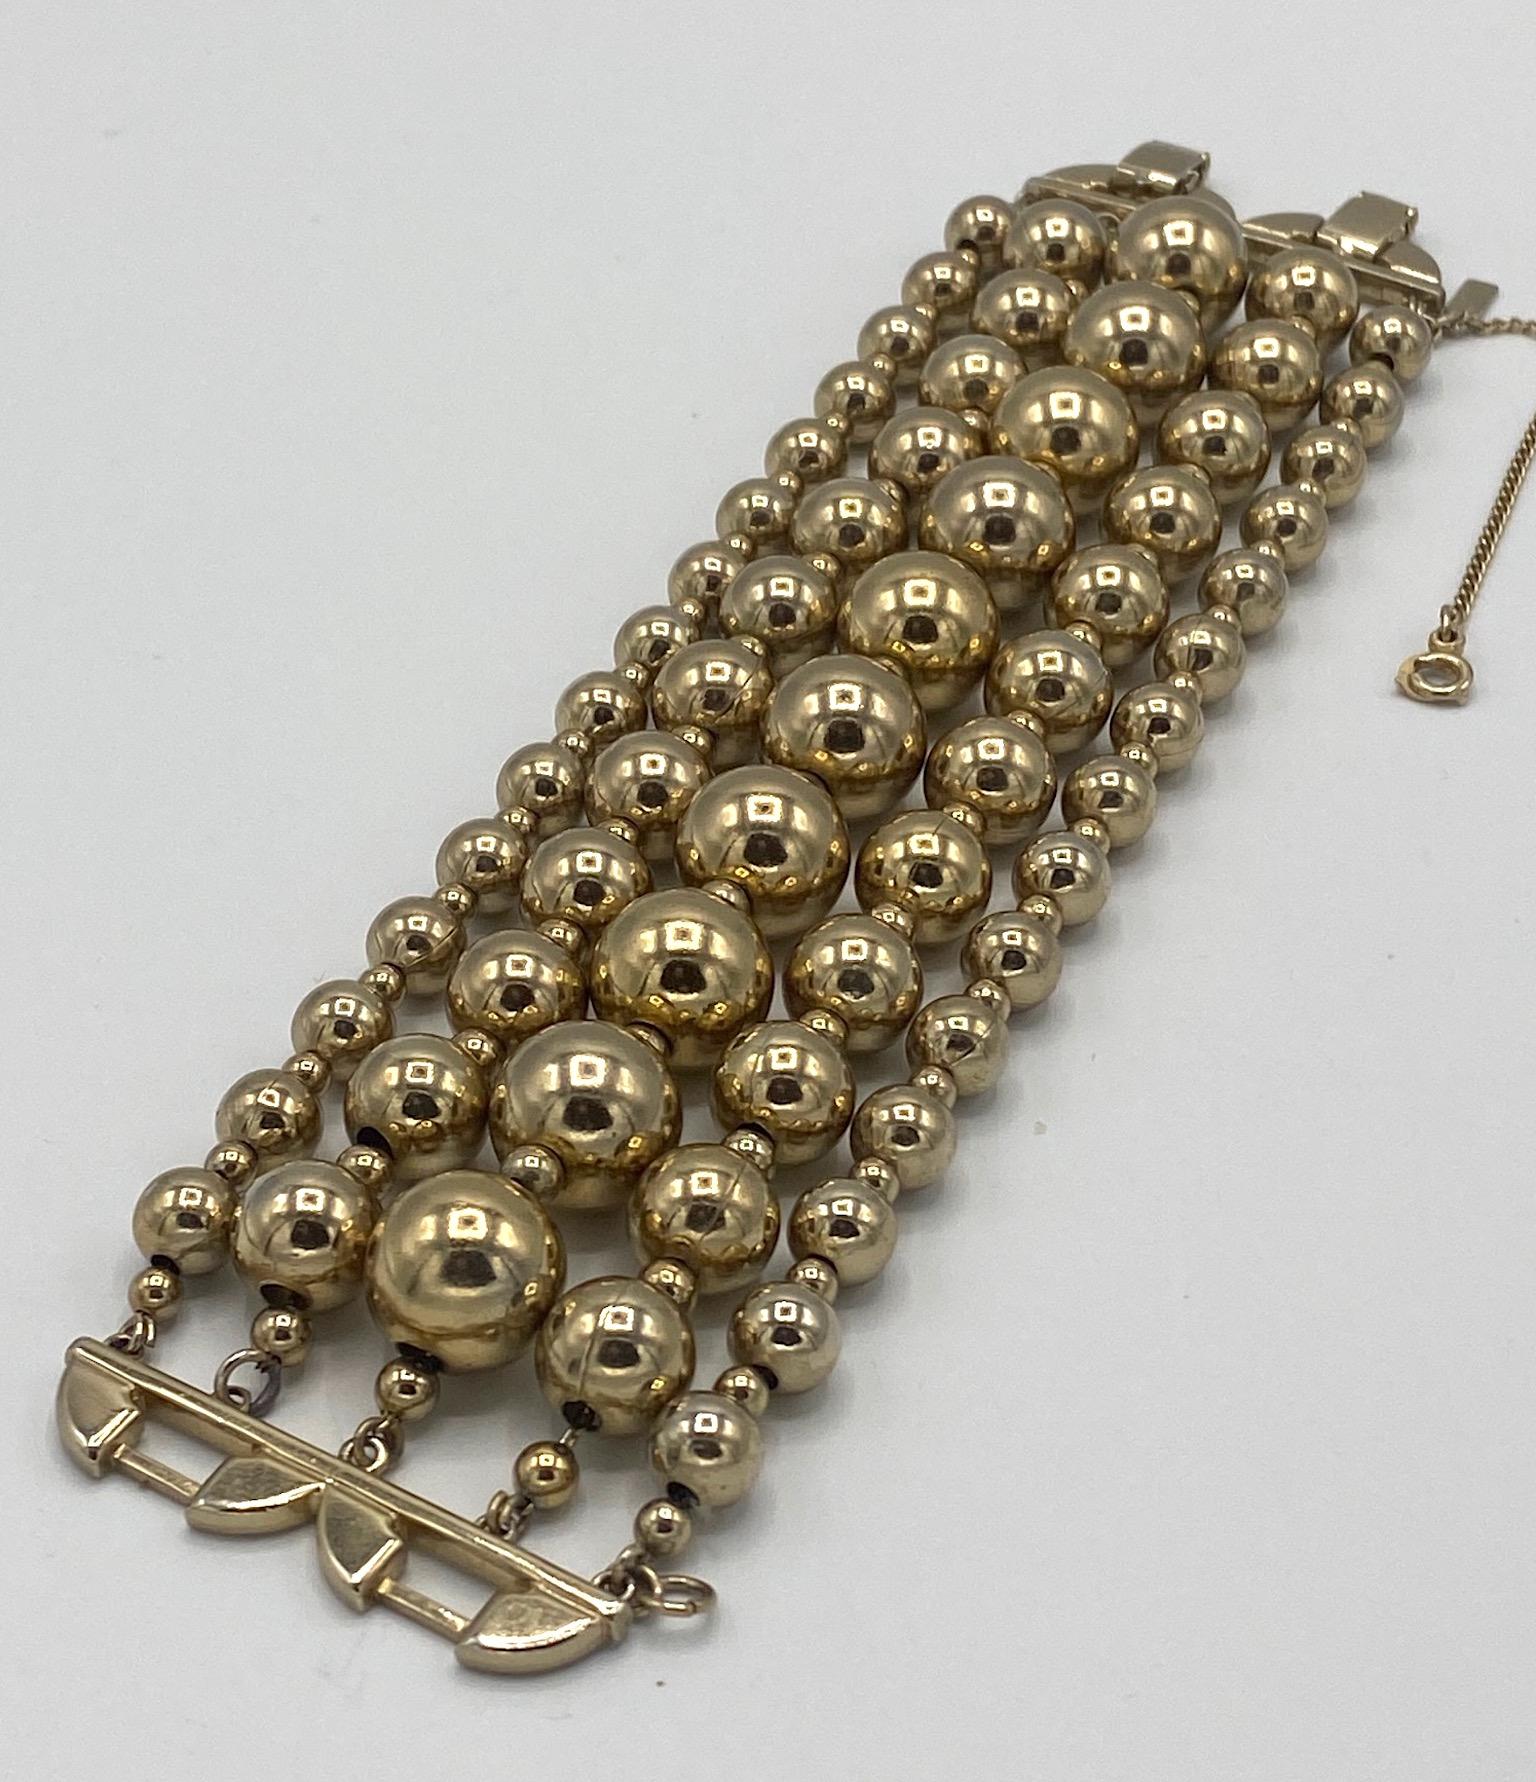 An elegant and wide gold bead bracelet by famous US company Monet circa 1950. Each strand consists of larger beads interspersed with .13 of a inch diameter small spacer beads and strung on chain. The central strand has large .5 inch diameter beads